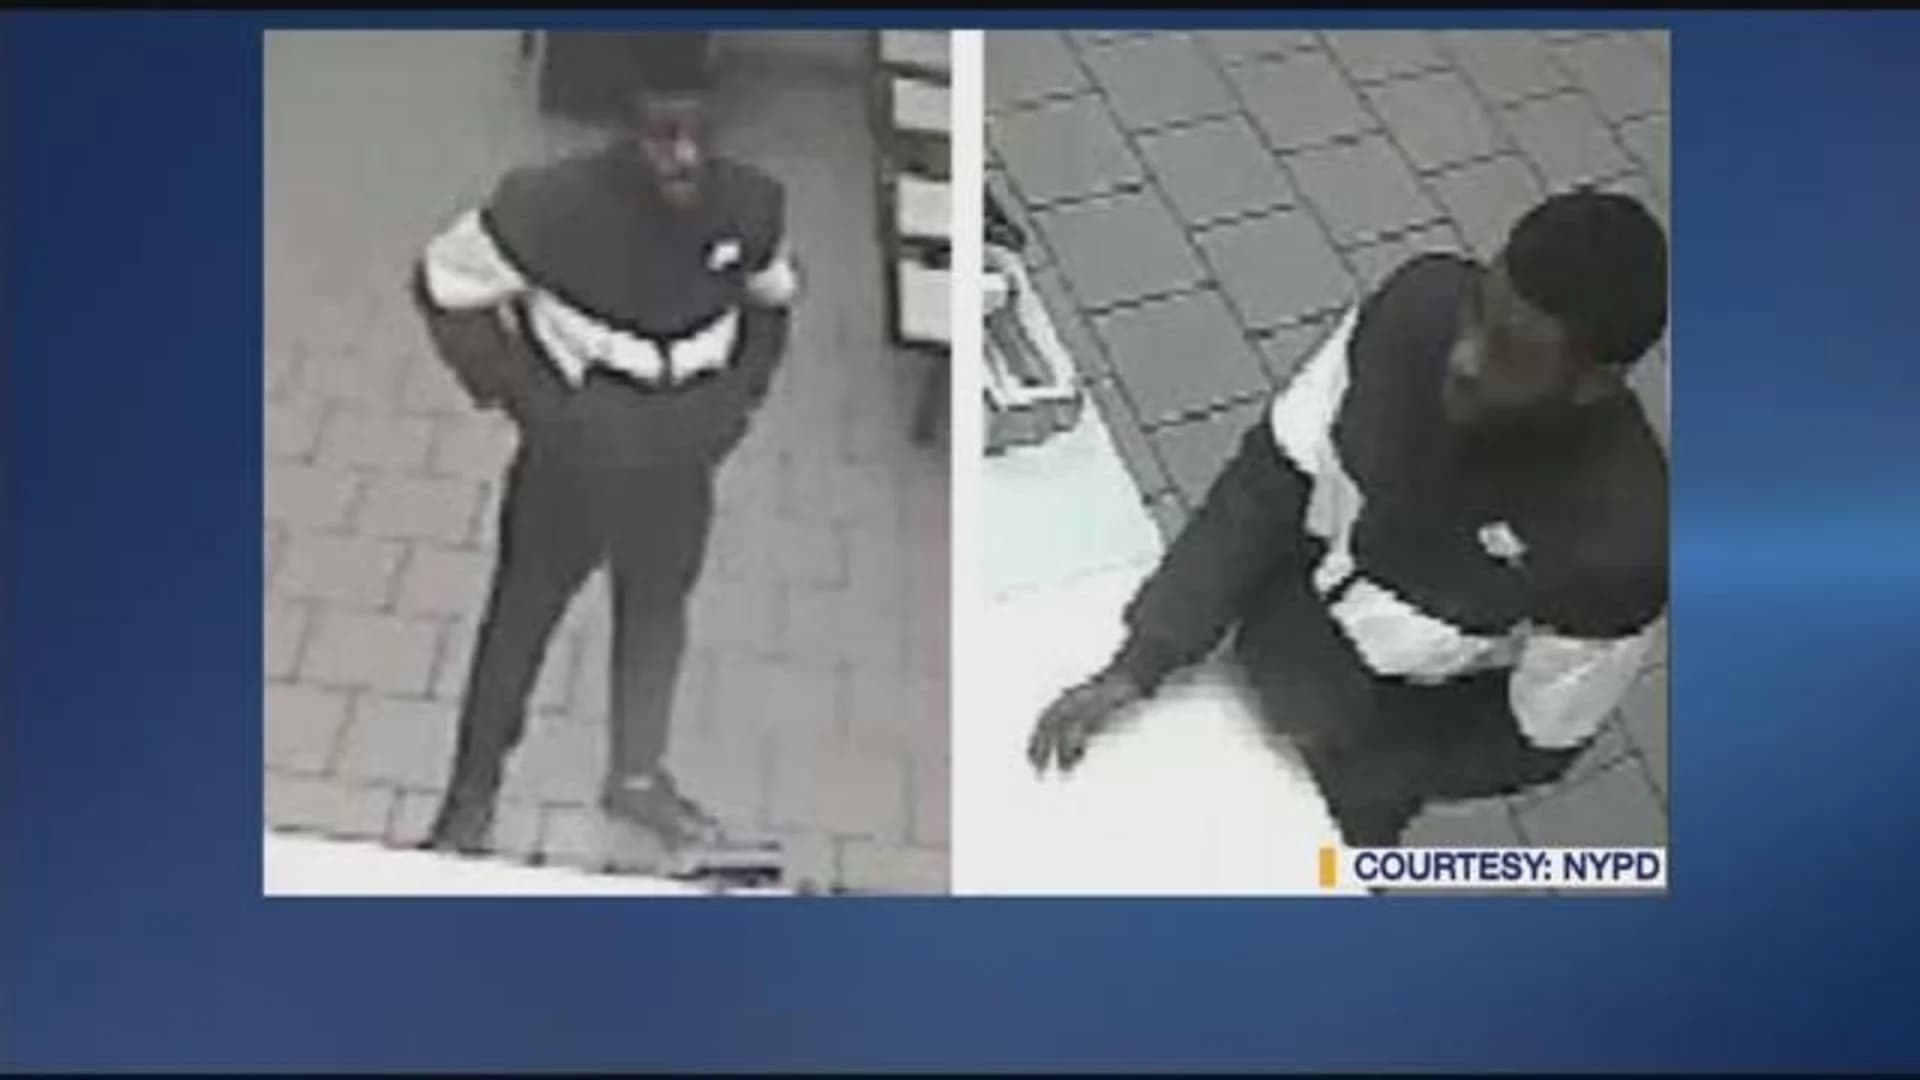 Police: Man hits woman with deep fryer basket, punches another in face at McDonald's